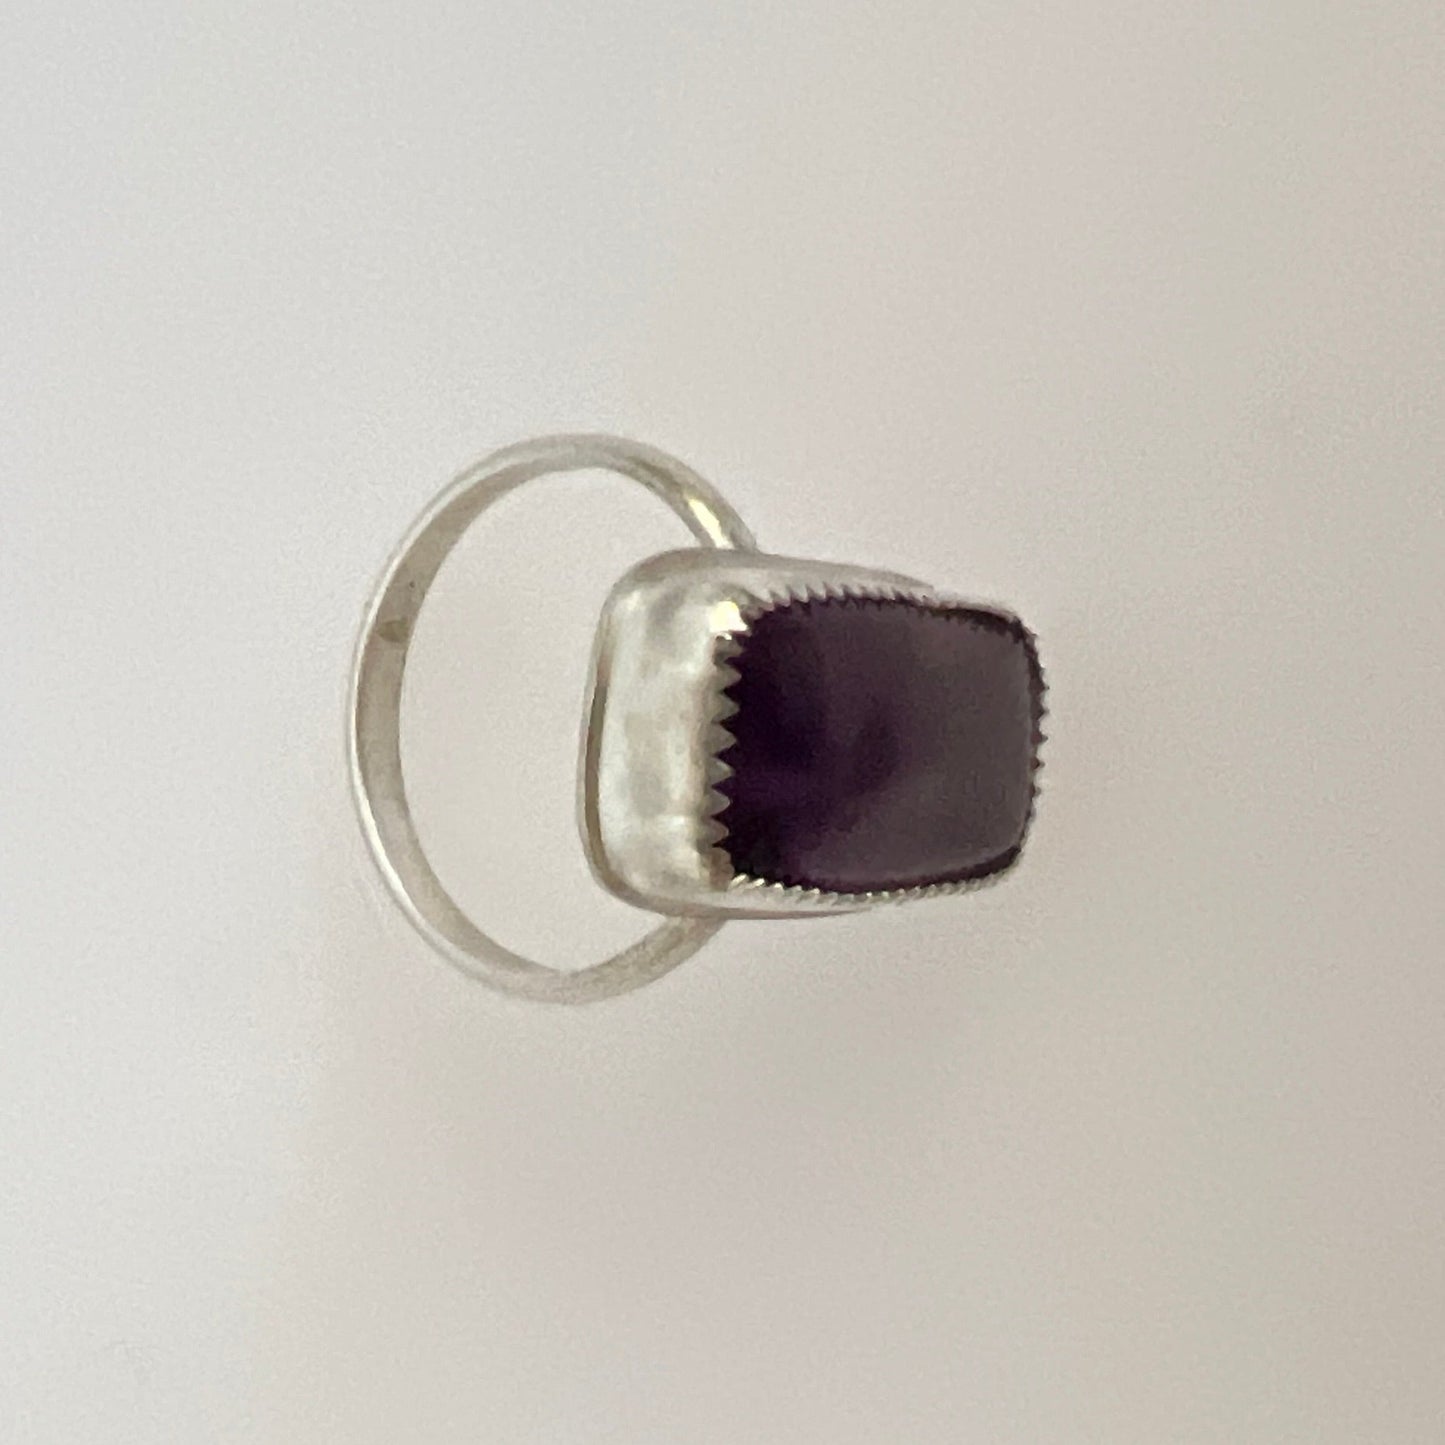 Amethyst sterling silver ring size 9.5